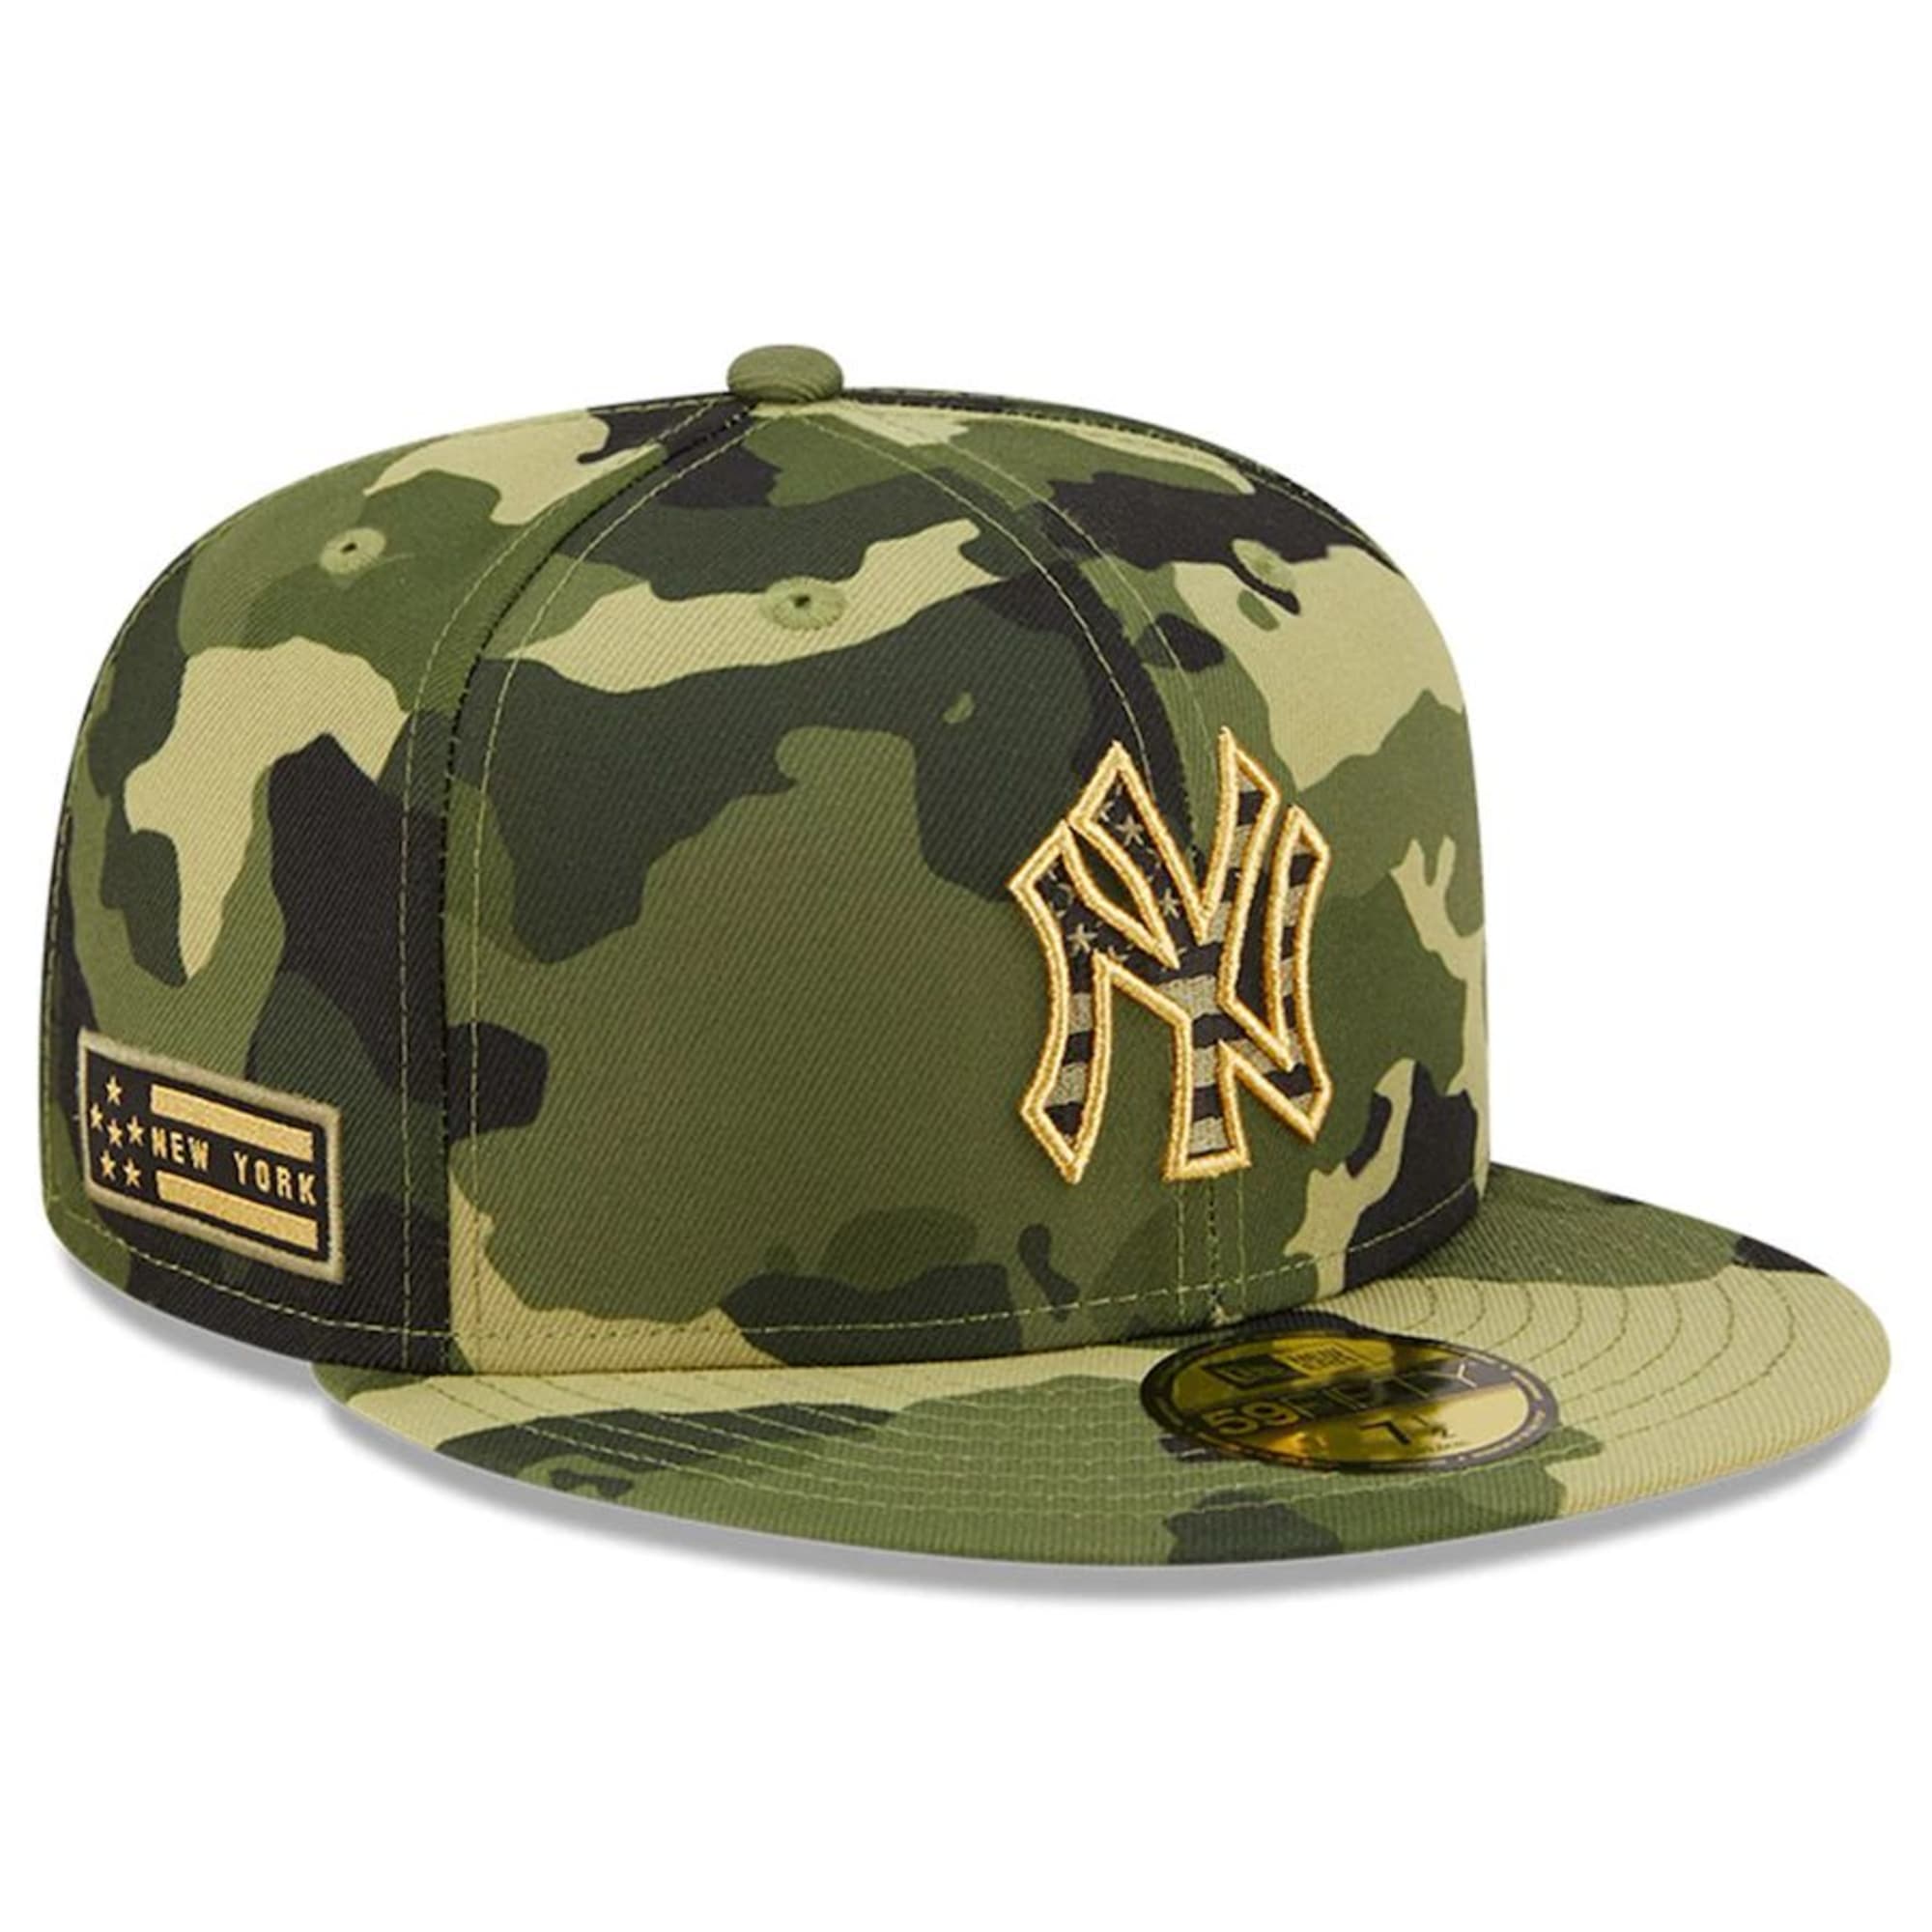 Memorial Day Camouflage Hat American USA Flag Miltary Summer Baseball Cap 